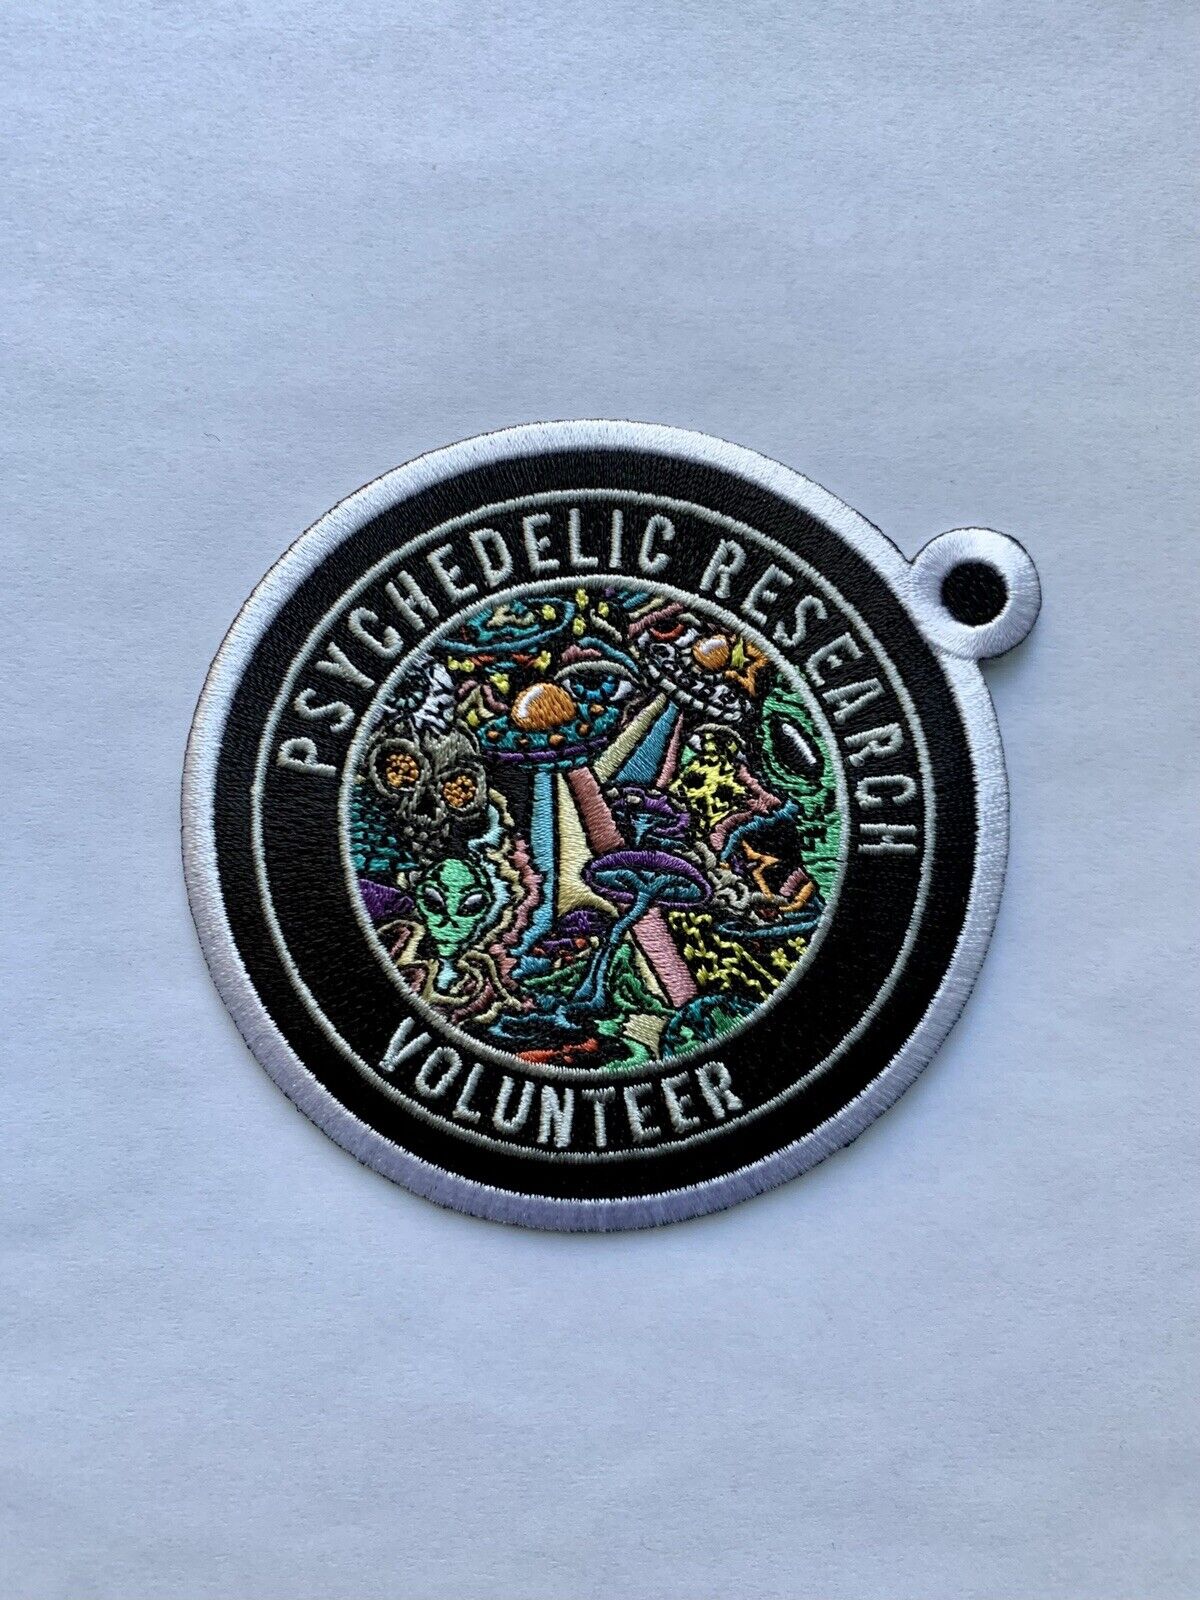 Psychedelic Researcher Volunteer Iron-On/Sew-On Patch Emo Punk 3.5” Embroidered